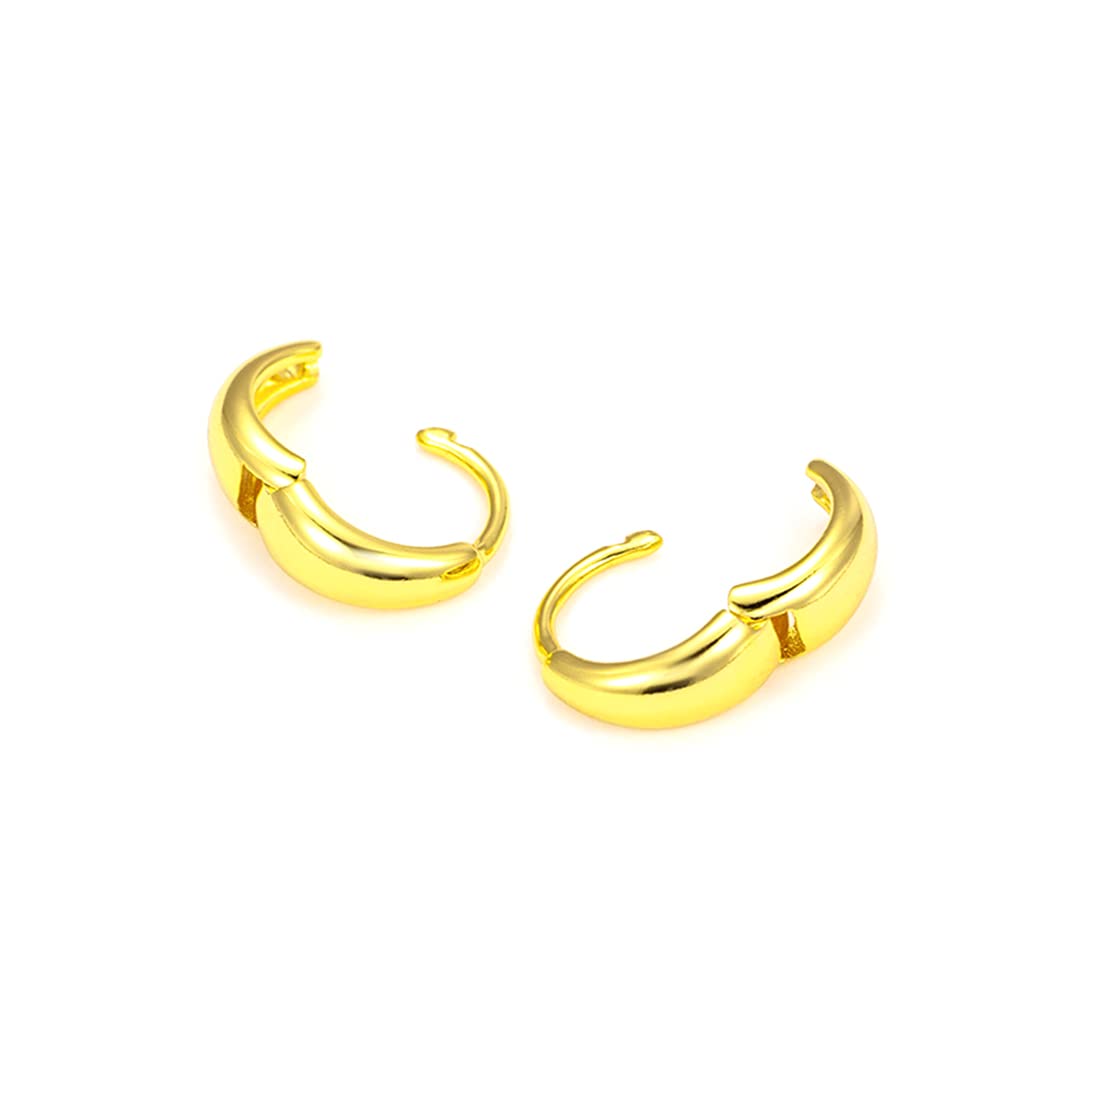 Yellow Chimes Earrings for Women and Girls Golden Hoops Earrings | Gold Plated Huggie Hoop Earrings for Women | Birthday Gift for girls and women Anniversary Gift for Wife